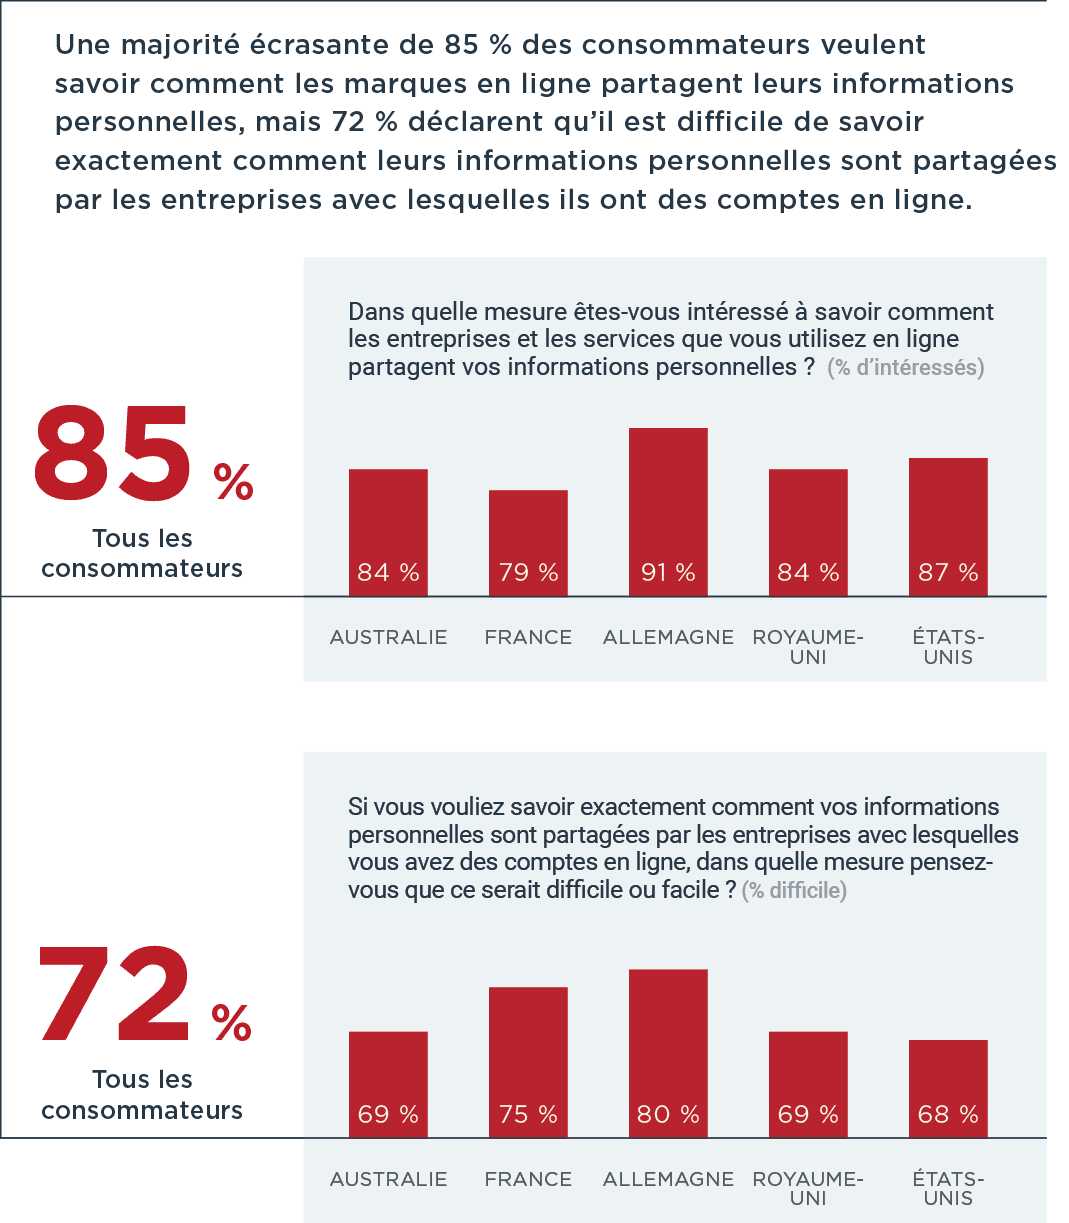 85% know how brands share their personal information 72% think it is easy to find out how personal info is shared